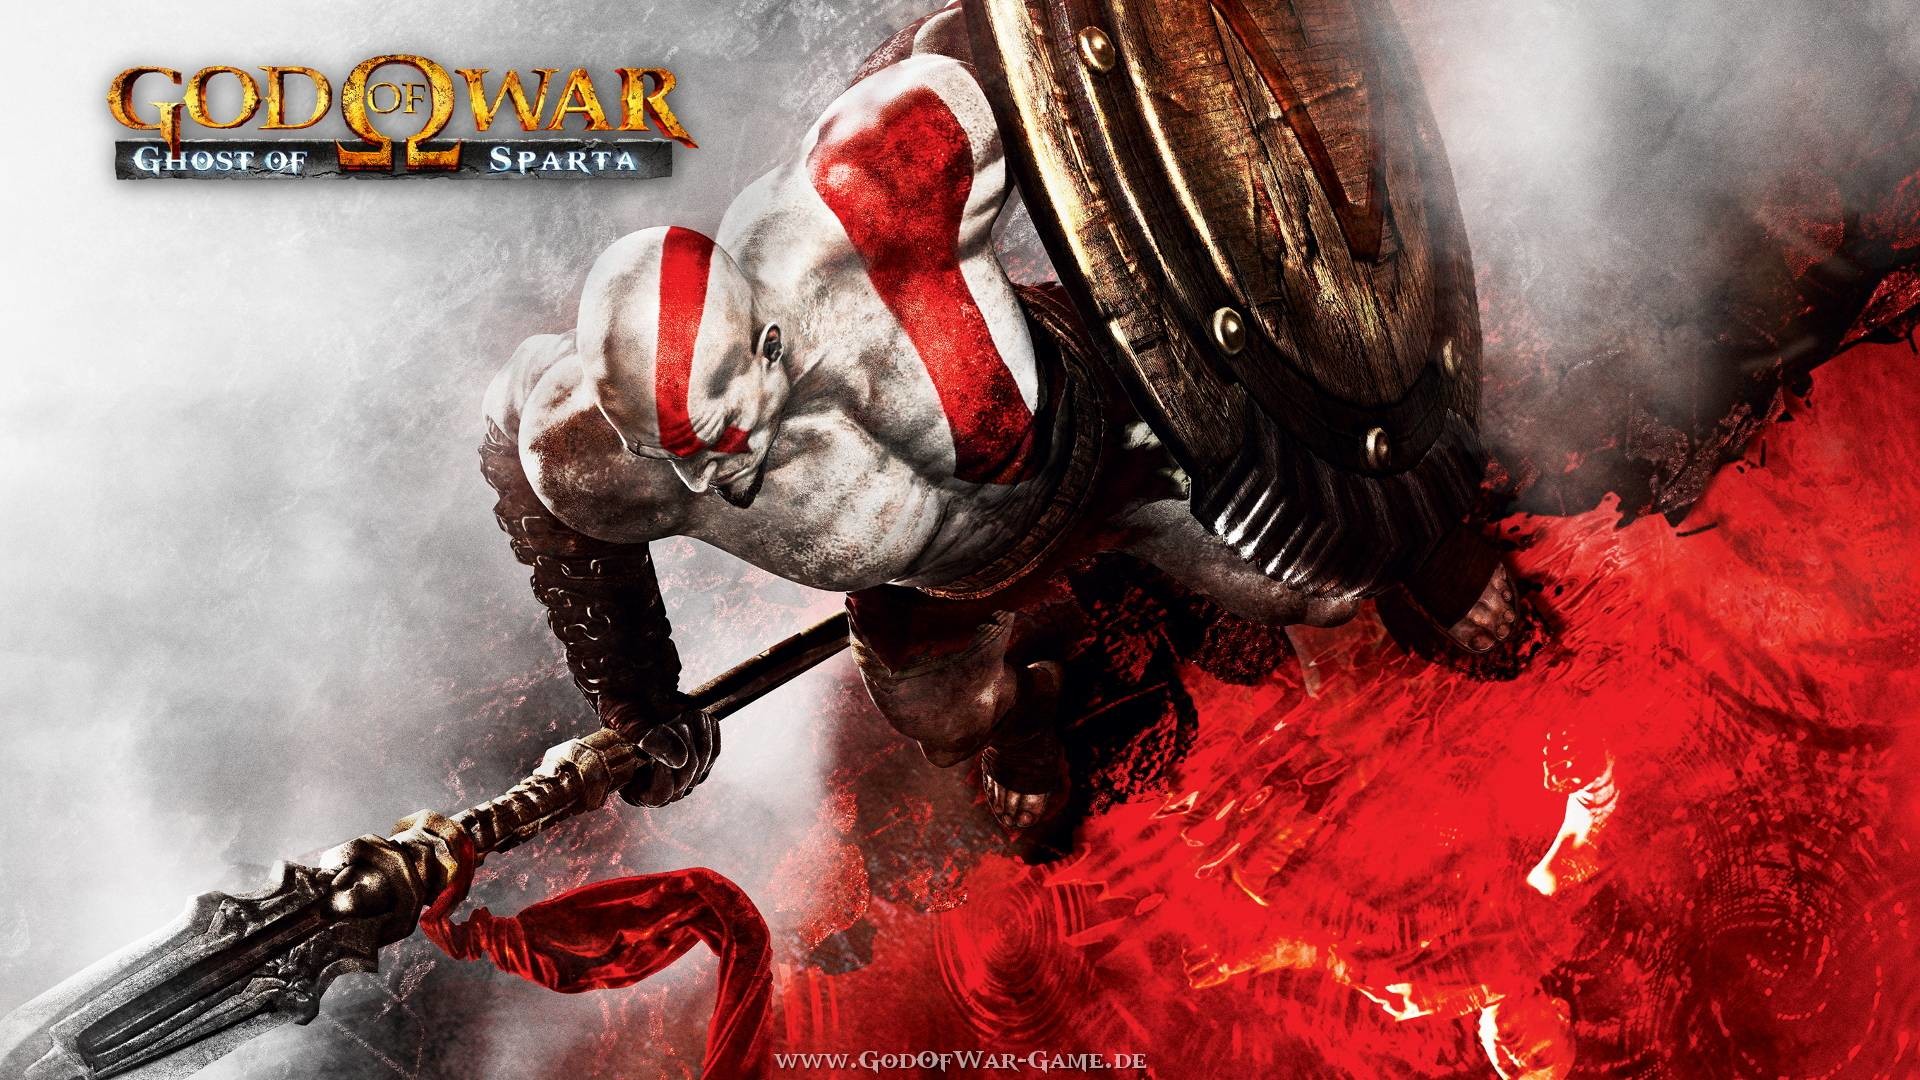 1920x1080 Wallpapers Of God Of War 4 by Lydia Chan #14